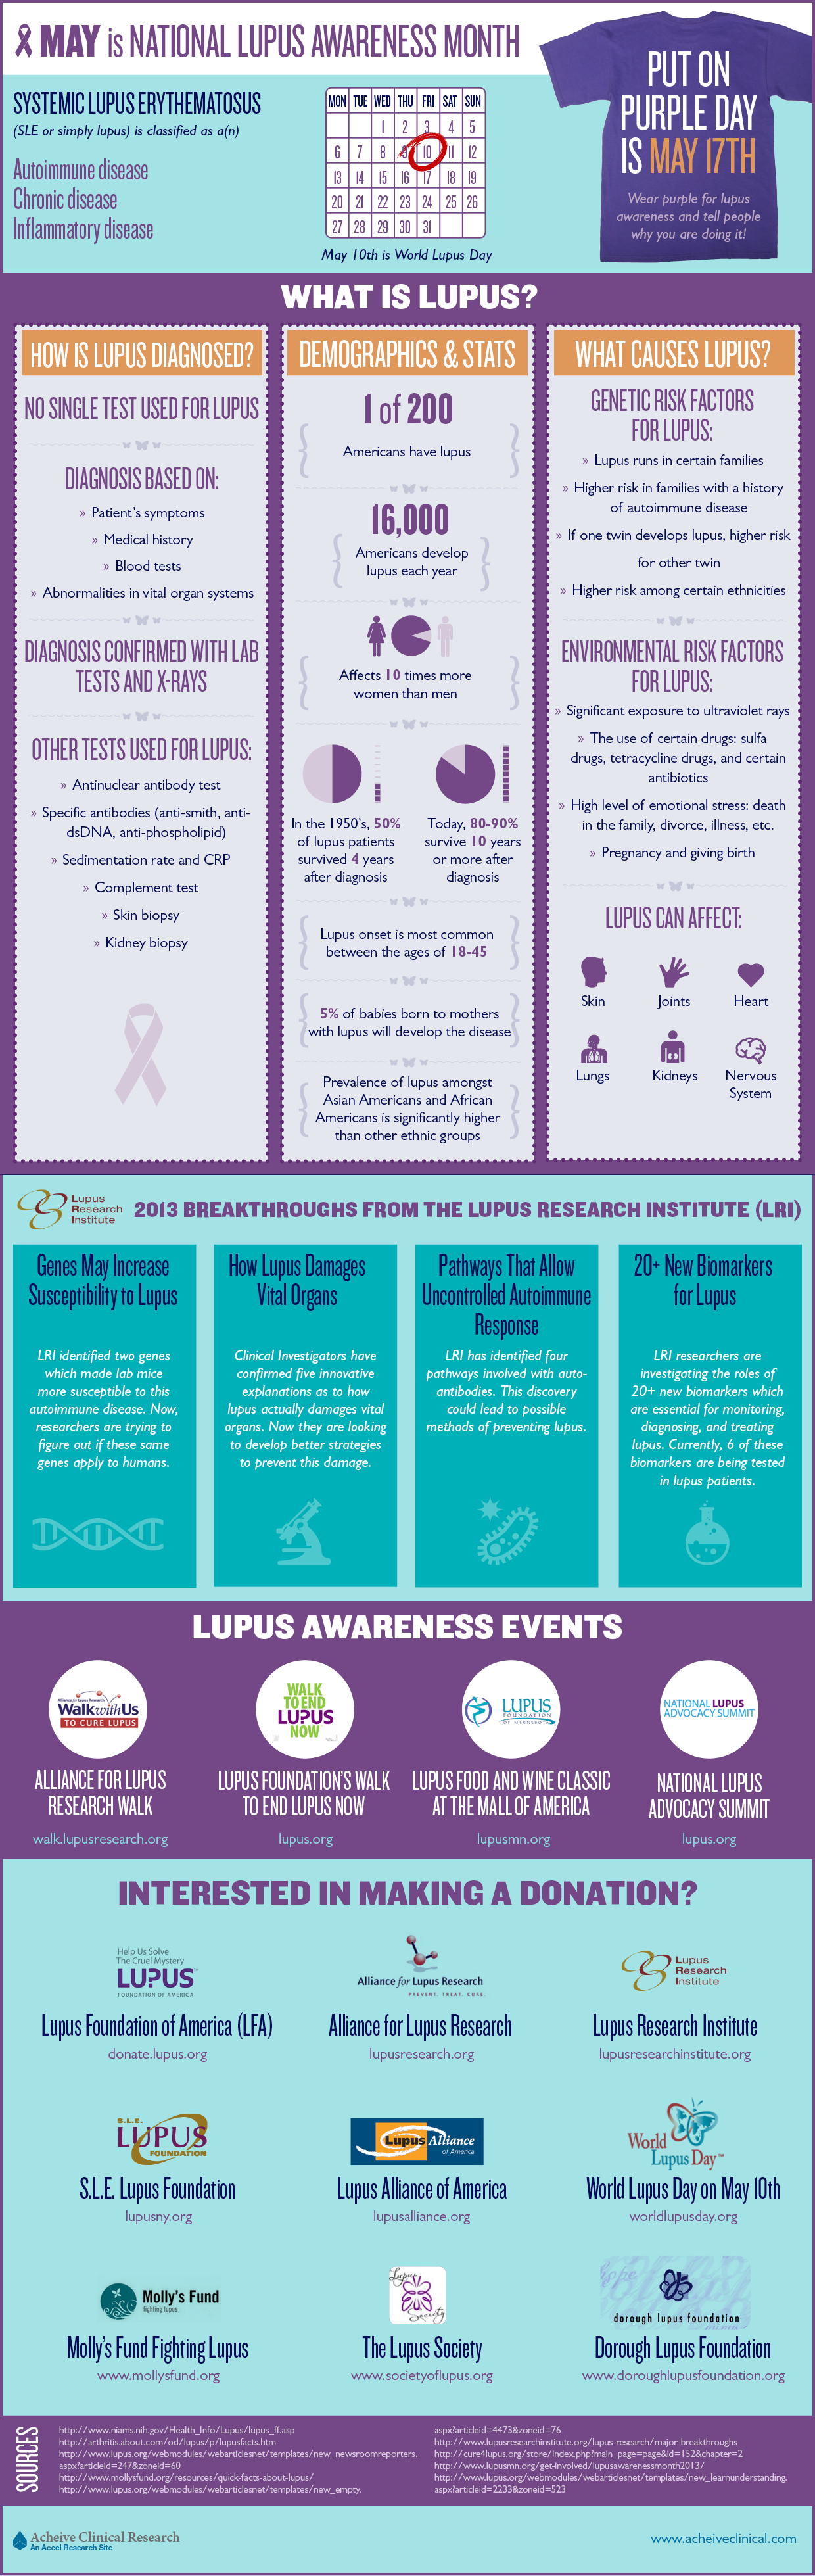 It is Lupus Awareness Month – Put On Some Purple!